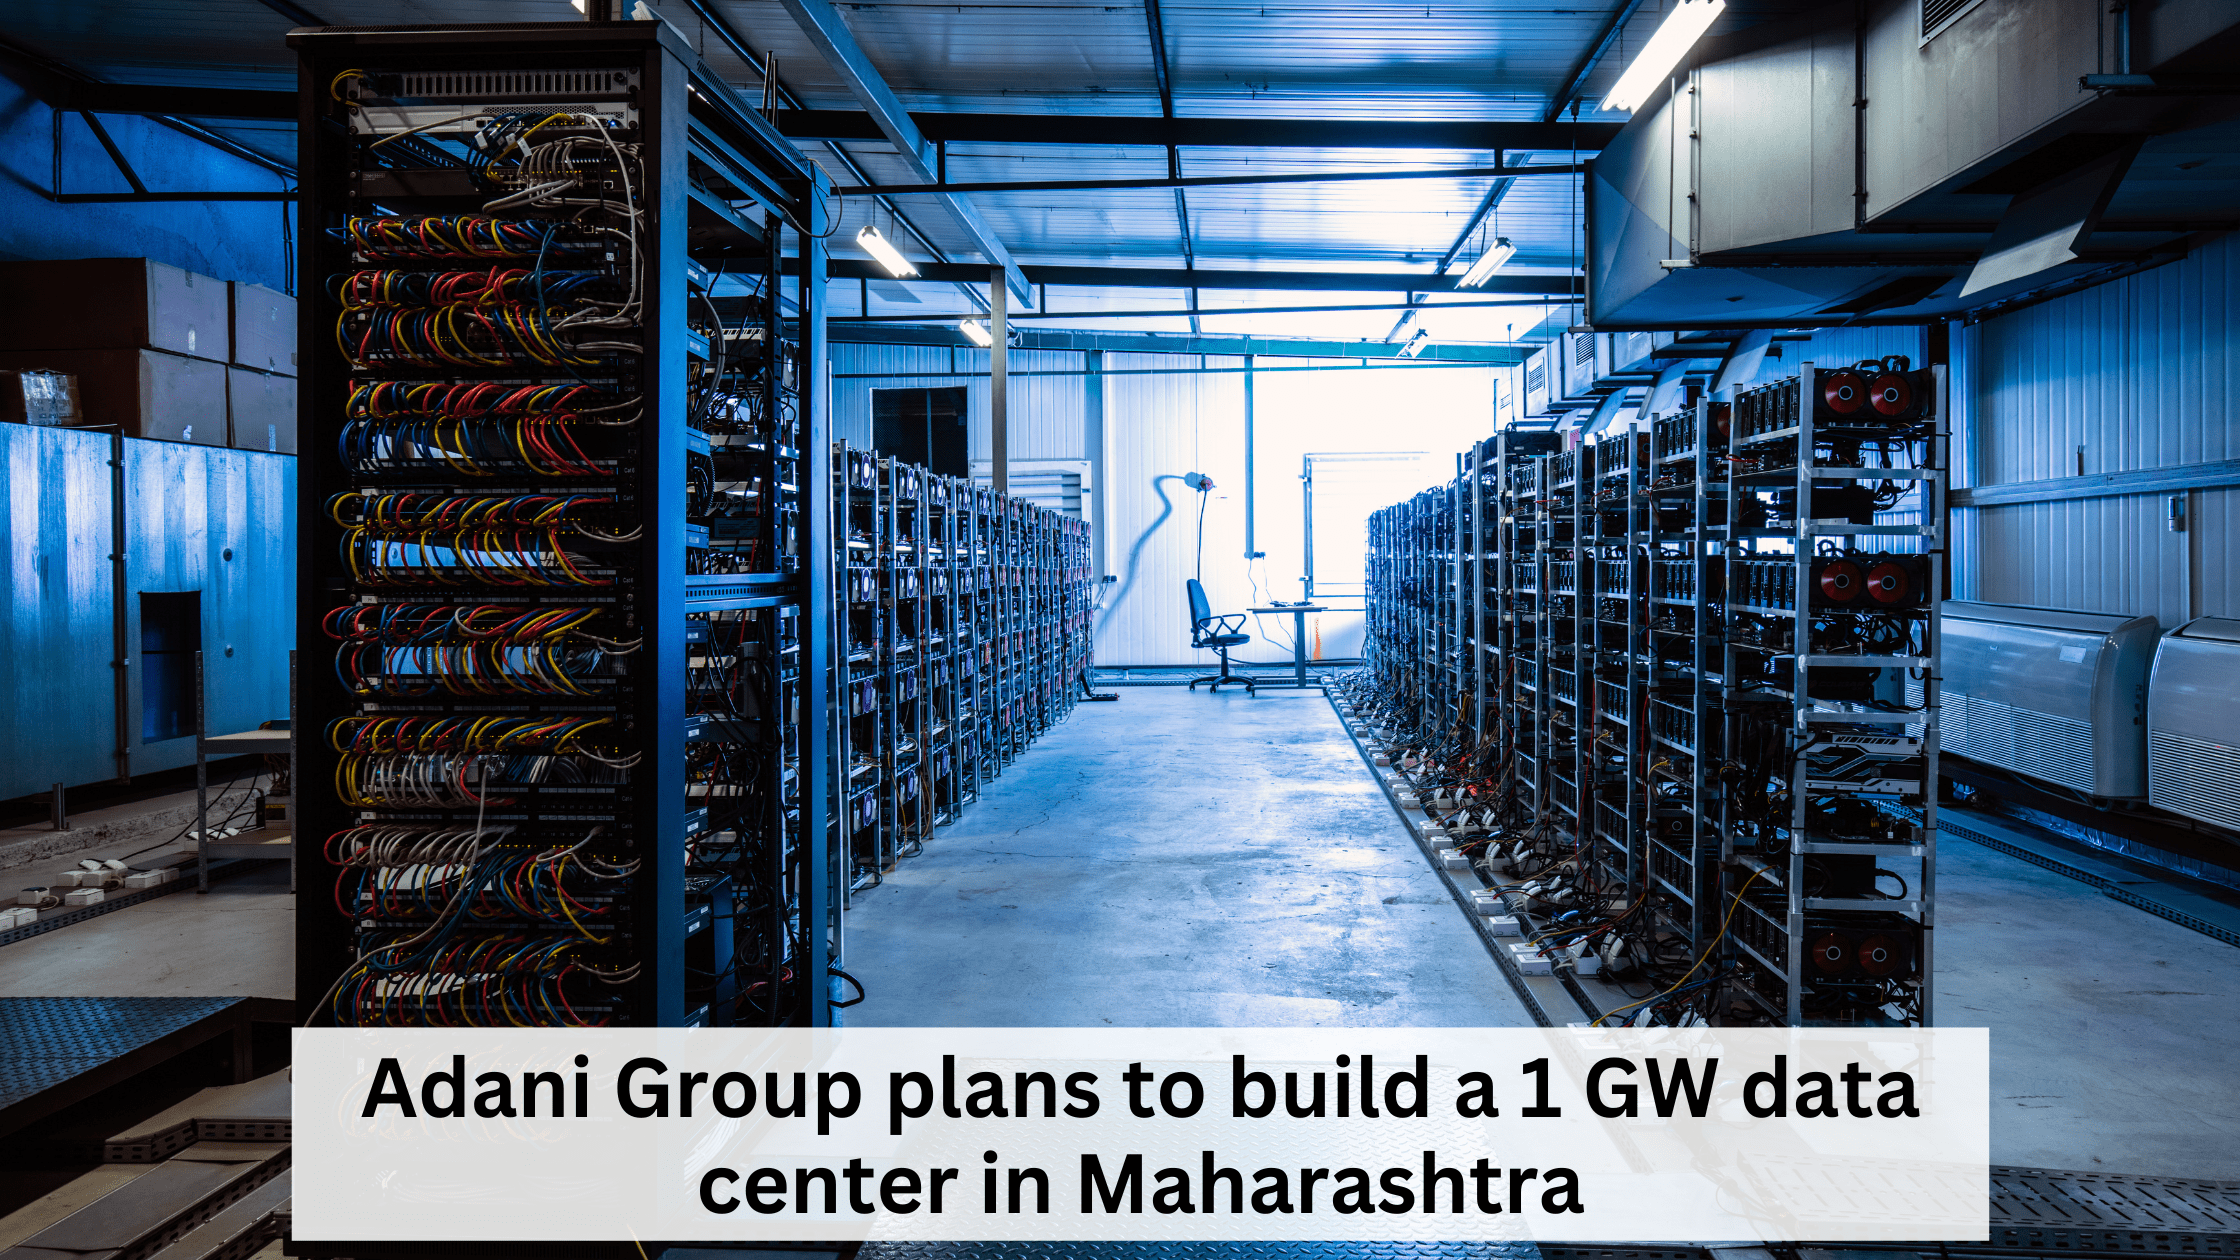 Adani Group plans to build a 1 GW data center in Maharashtra